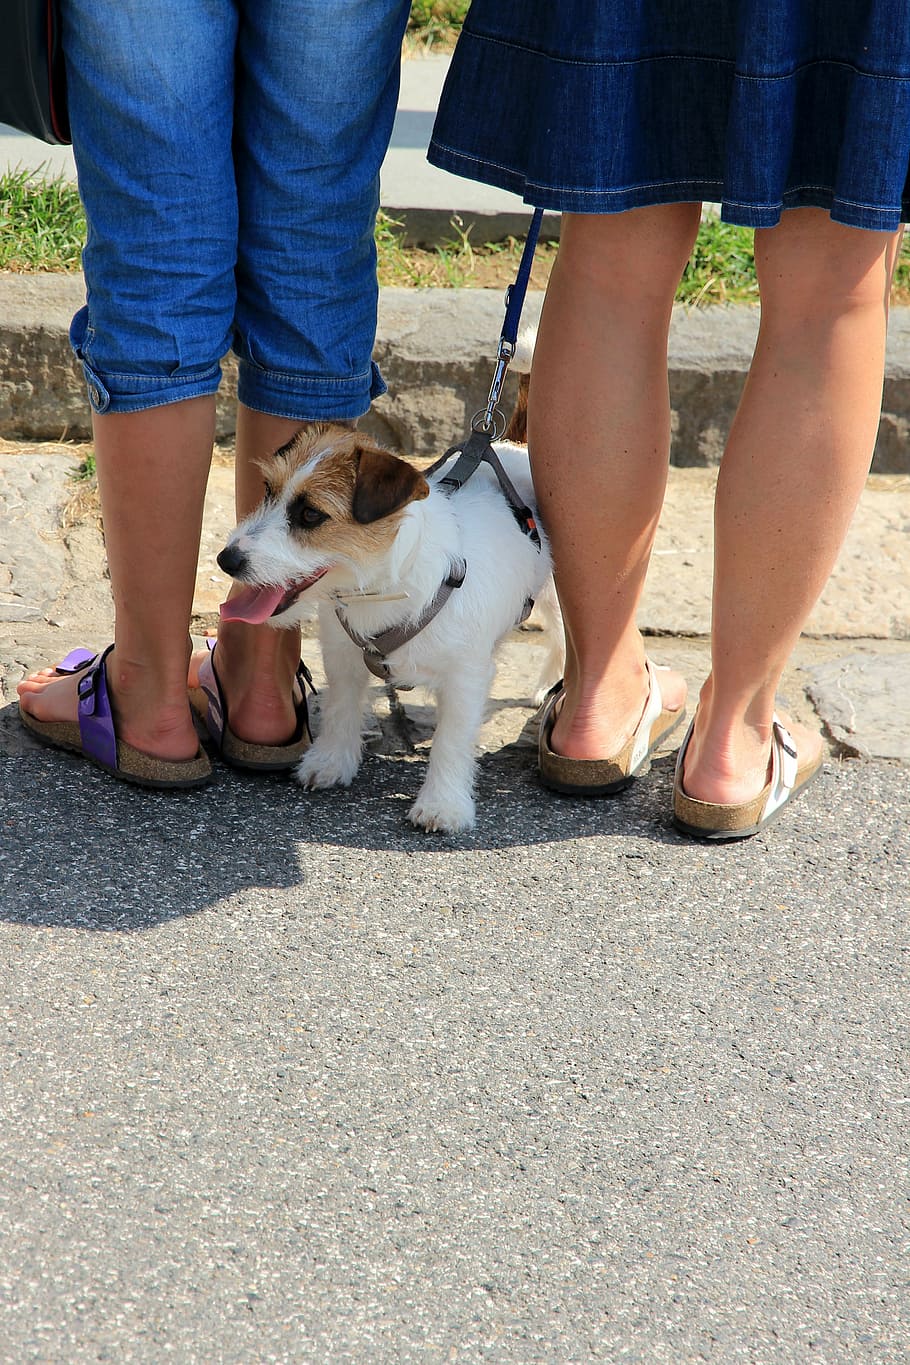 dog, legs, knuffig, sandals, birkenstock, pair, pet, low section, pets, domestic